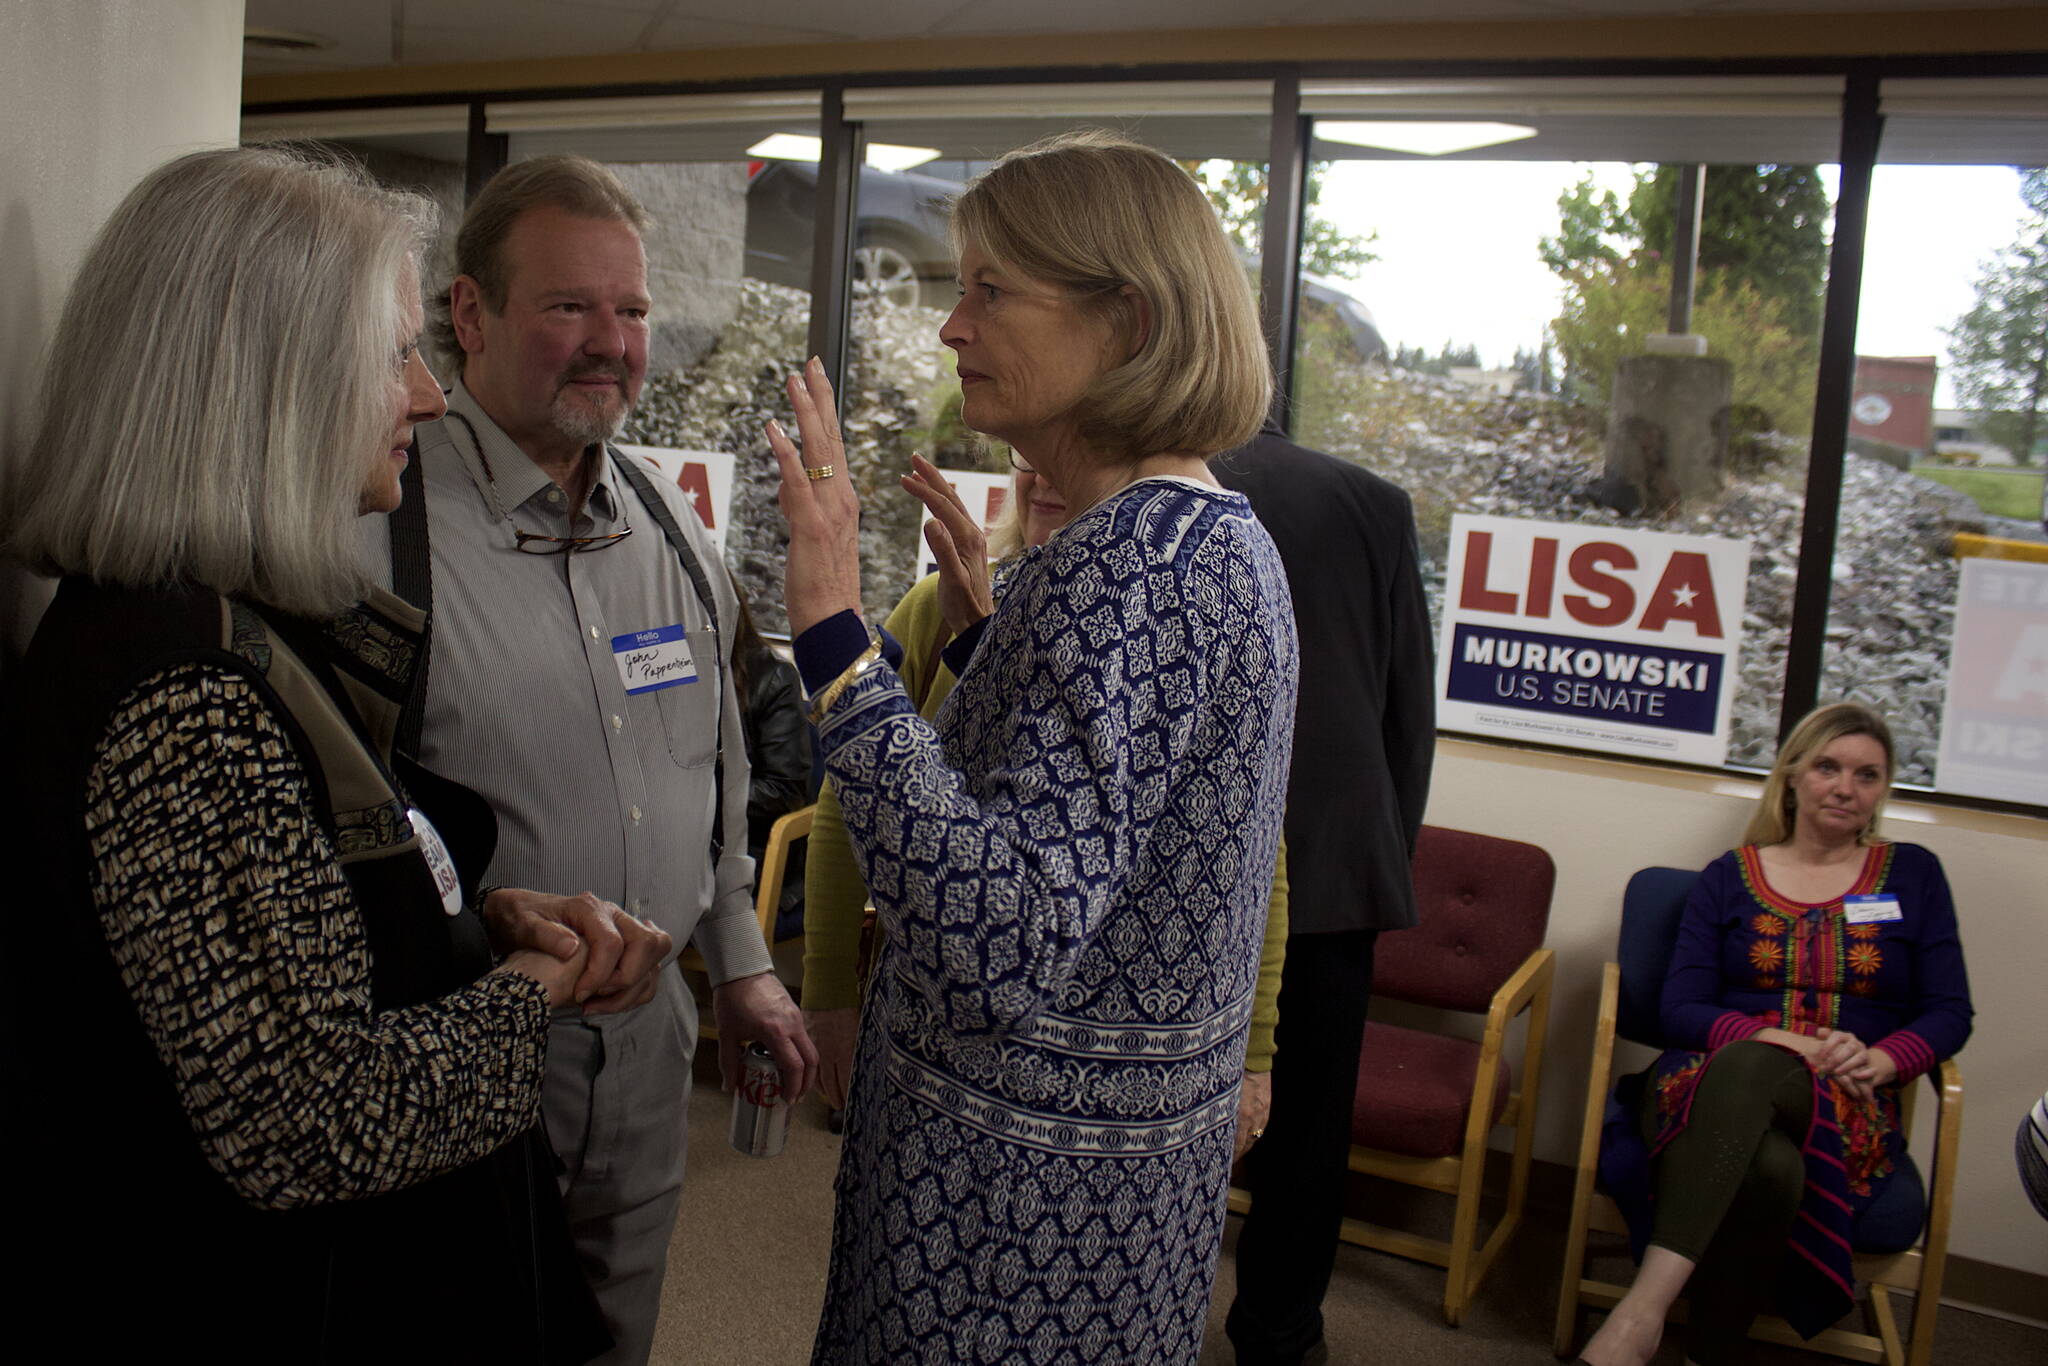 Mark Sabbatini / Juneau Empire 
U.S. Sen. Lisa Murkowski discusses her reelection campaign with supporters during the official opening of her Juneau campaign headquarters Thursday evening at Kootznoowoo Plaza.